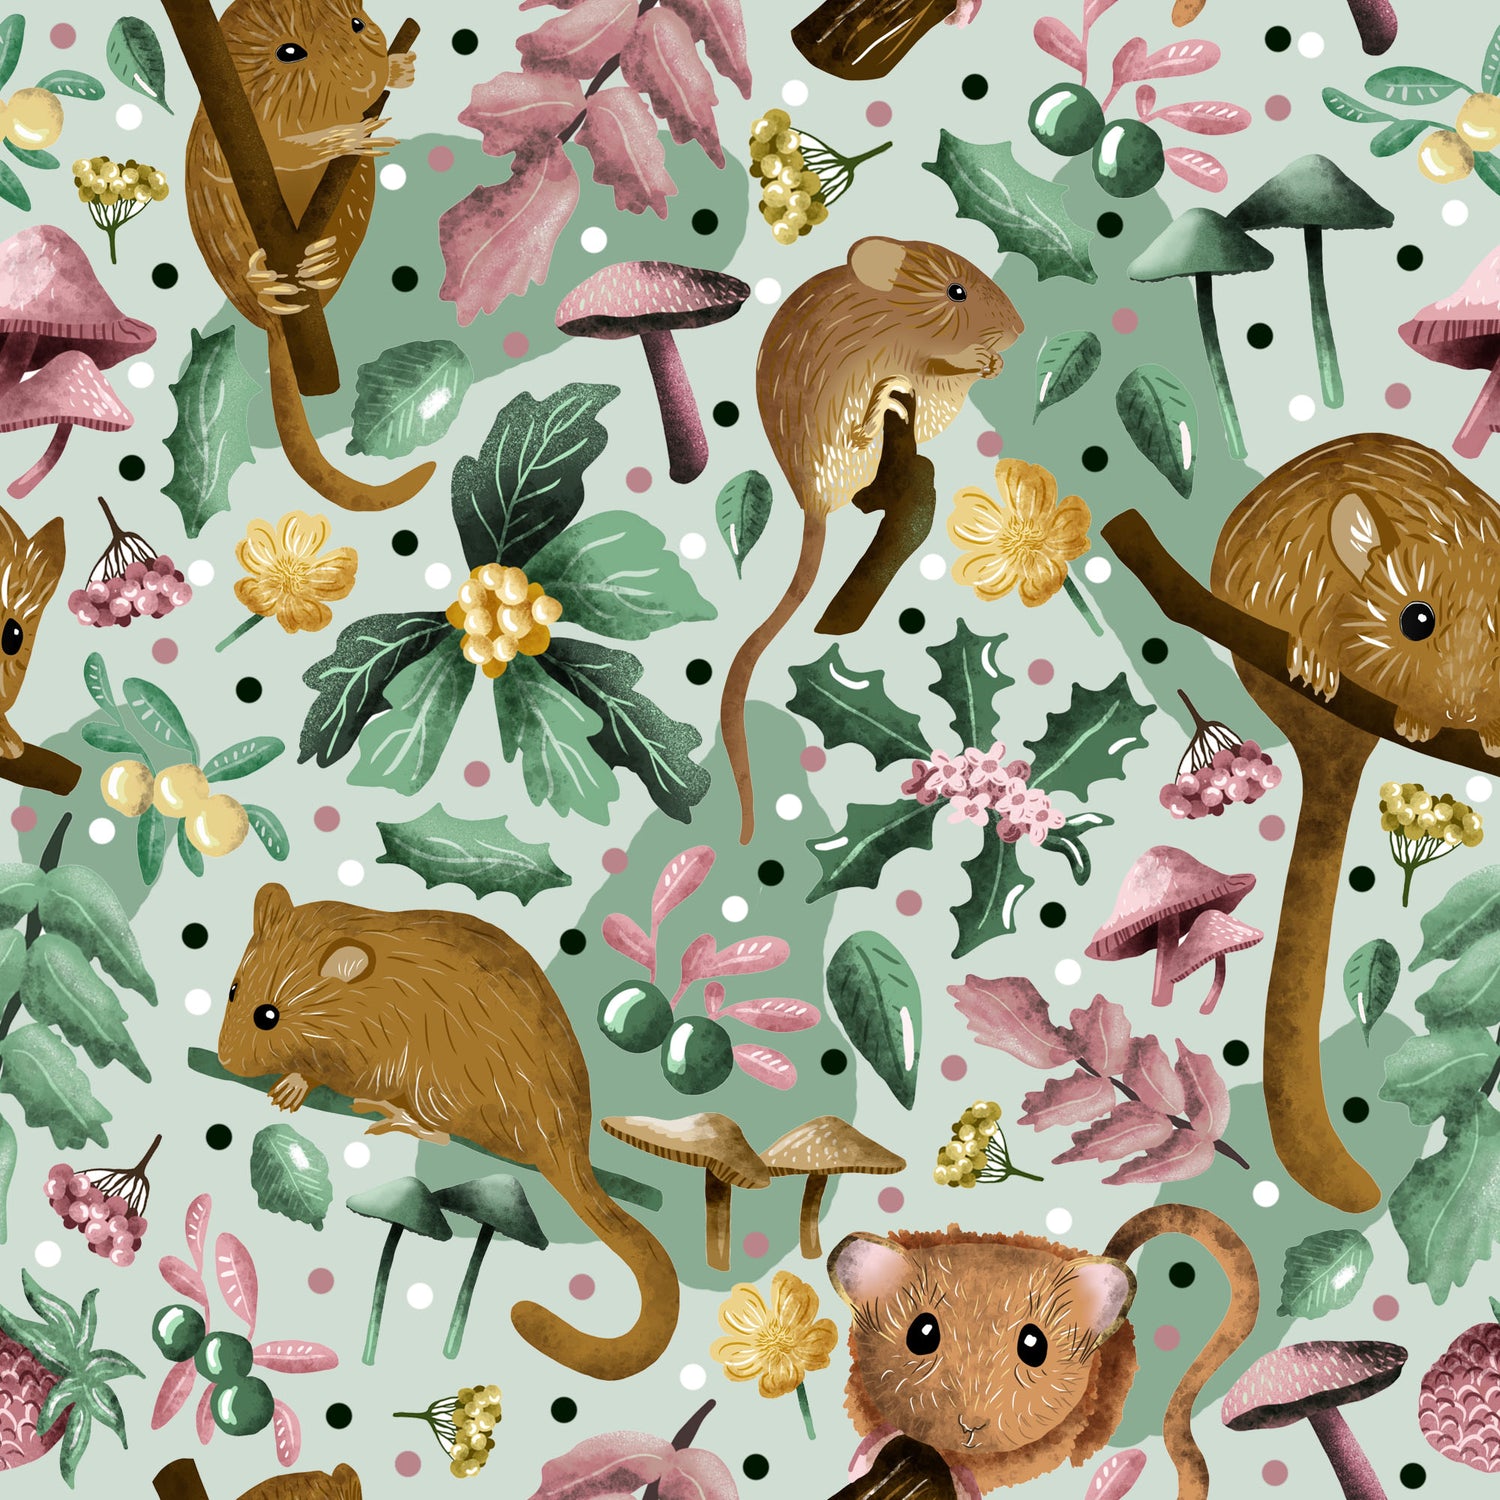 dormouse surface pattern design as a seamless repeat tile